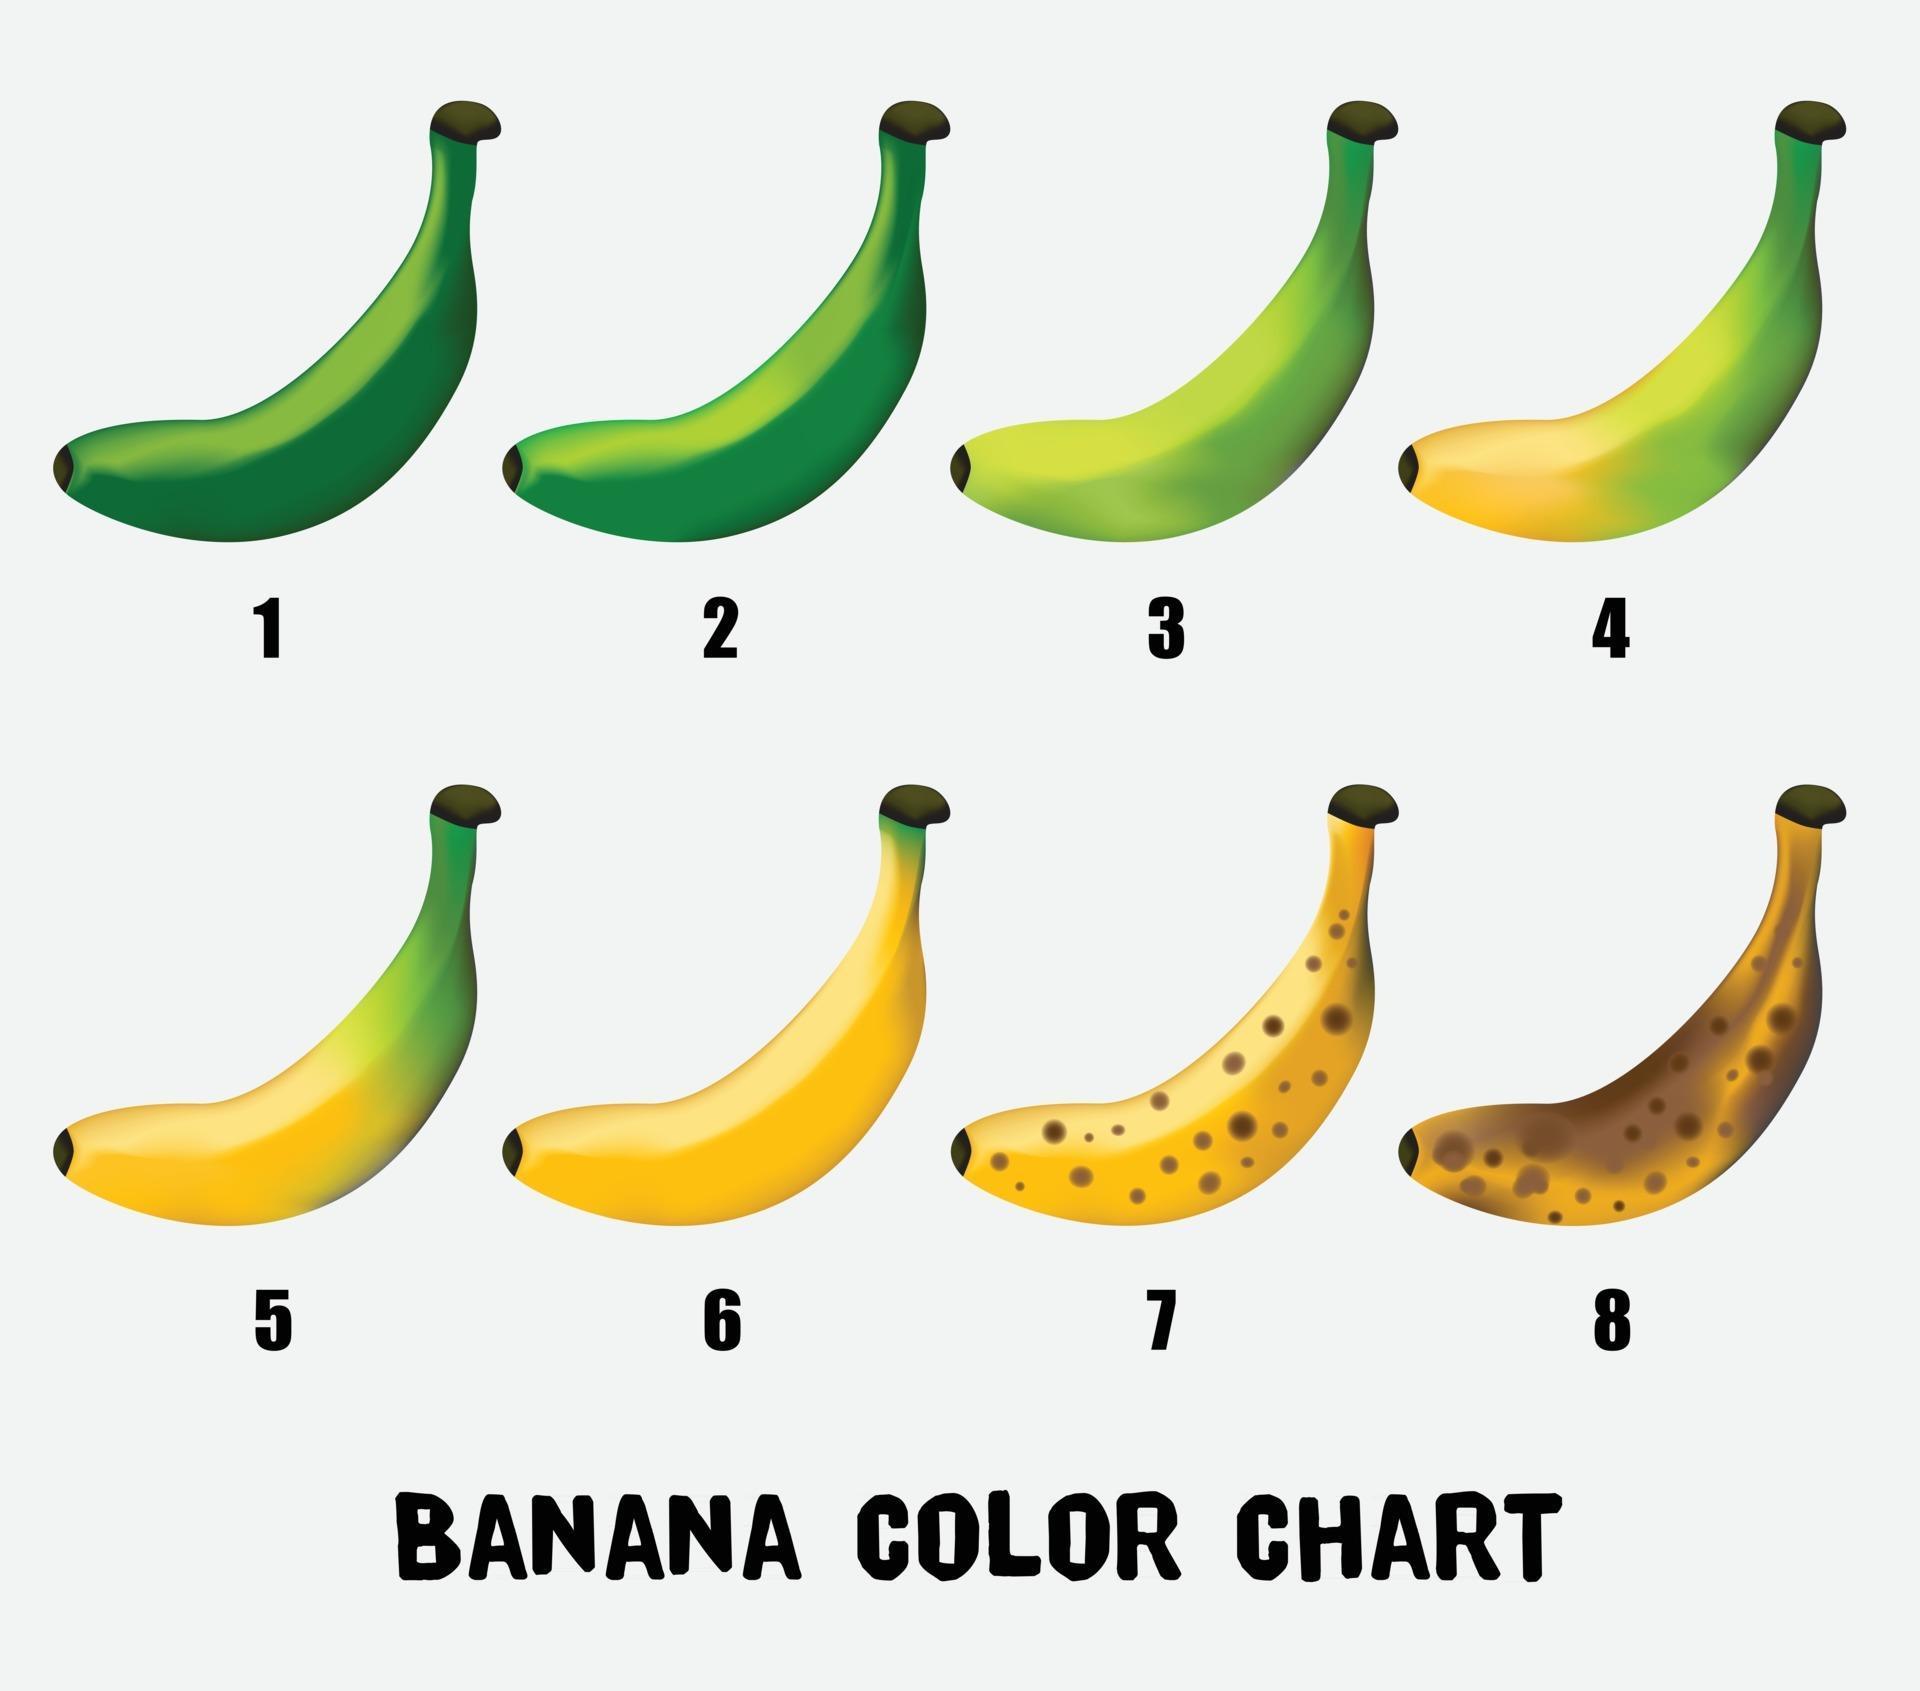 Color chart of banana from young green to yellow until ripe. 2968320